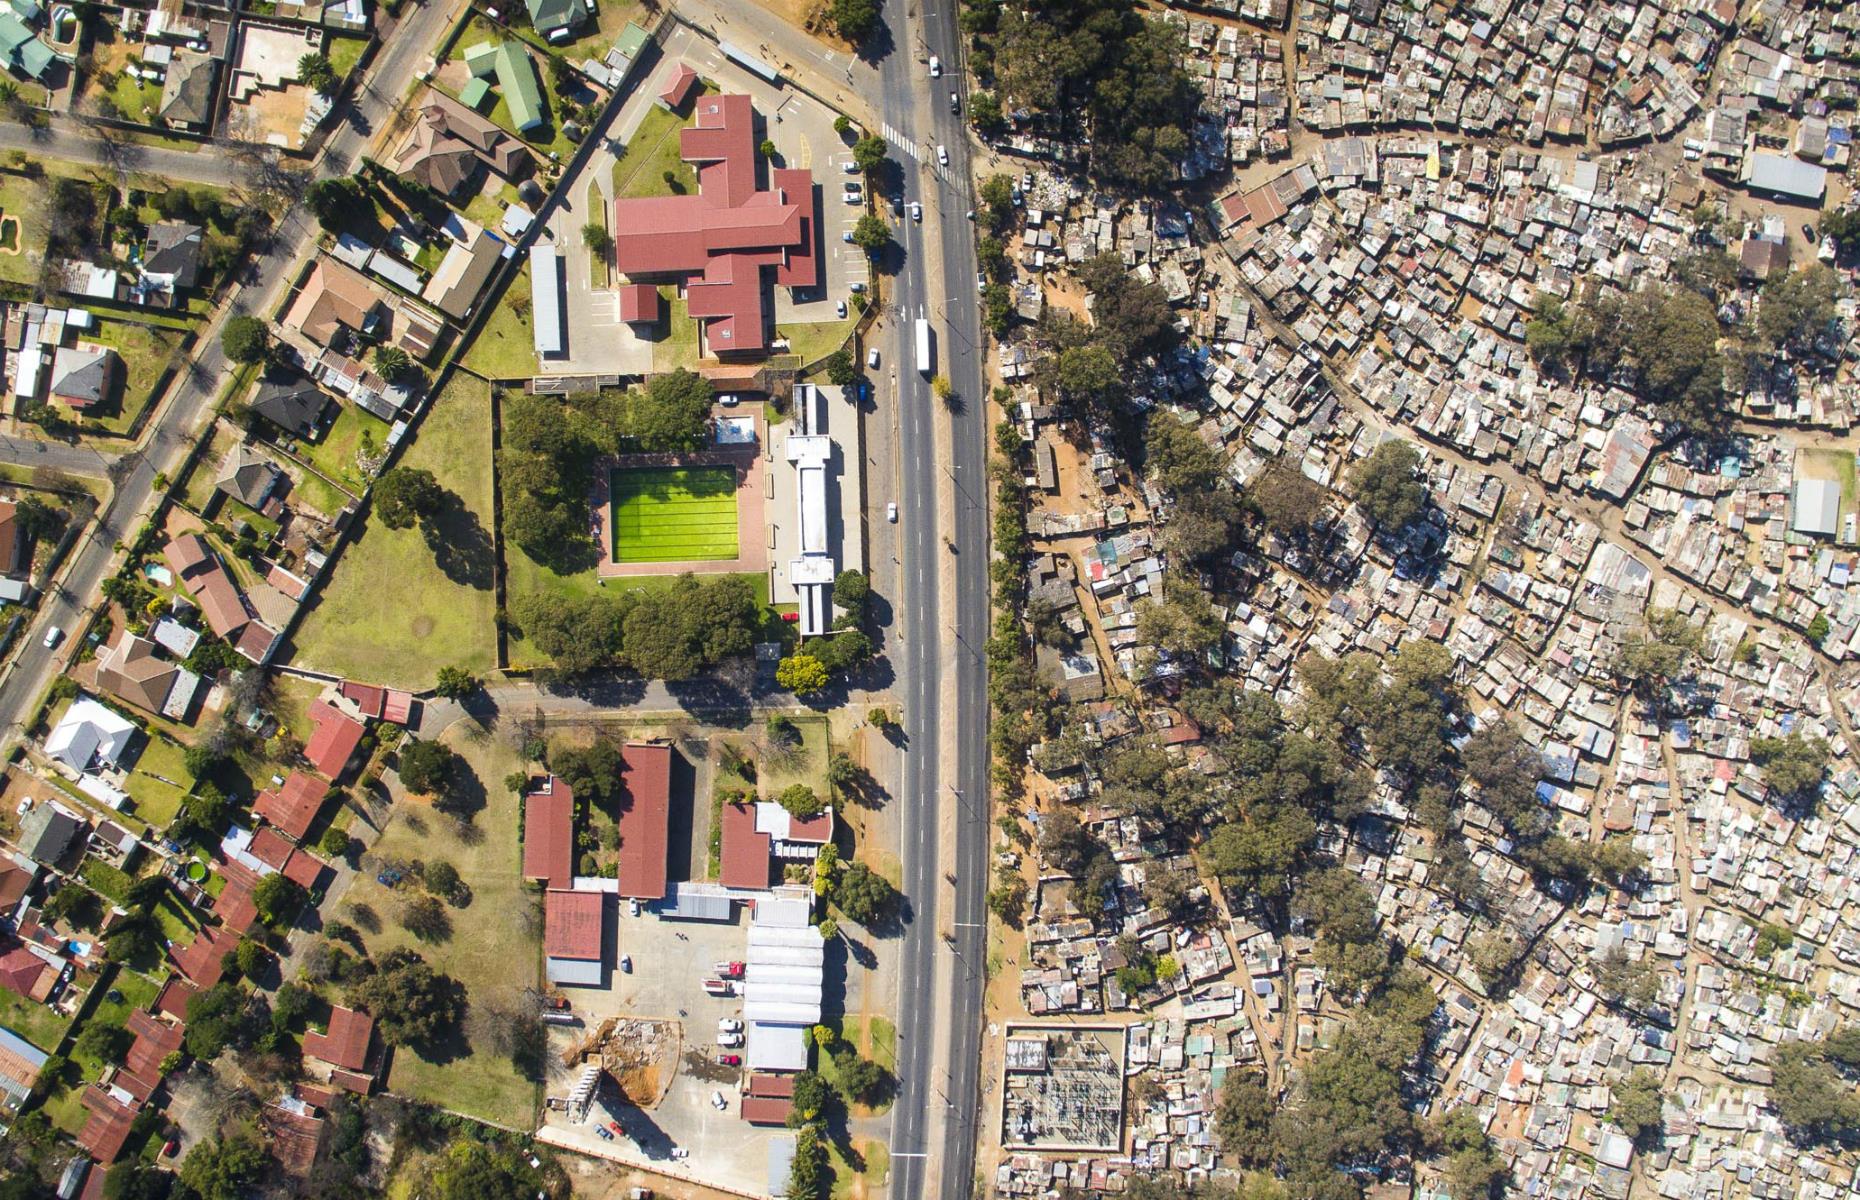 <p>This picture of the affluent Primrose area on the left and the Makause settlement in Johannesburg once again shows just a road separating extreme wealth from poverty. Sitting on an abandoned gold mine, the two places embody Apartheid, even 23 years after it was abolished. Primrose was named after the daughter of the British financier Barney Barnato in 1886, while Black Africans lived separately in Makause. Today, little has changed.</p>  <p><strong>These <a href="https://www.lovemoney.com/news/80106/11-cities-that-used-to-be-rich-but-are-now-poor">11 cities used to be rich but are now poor</a></strong></p>